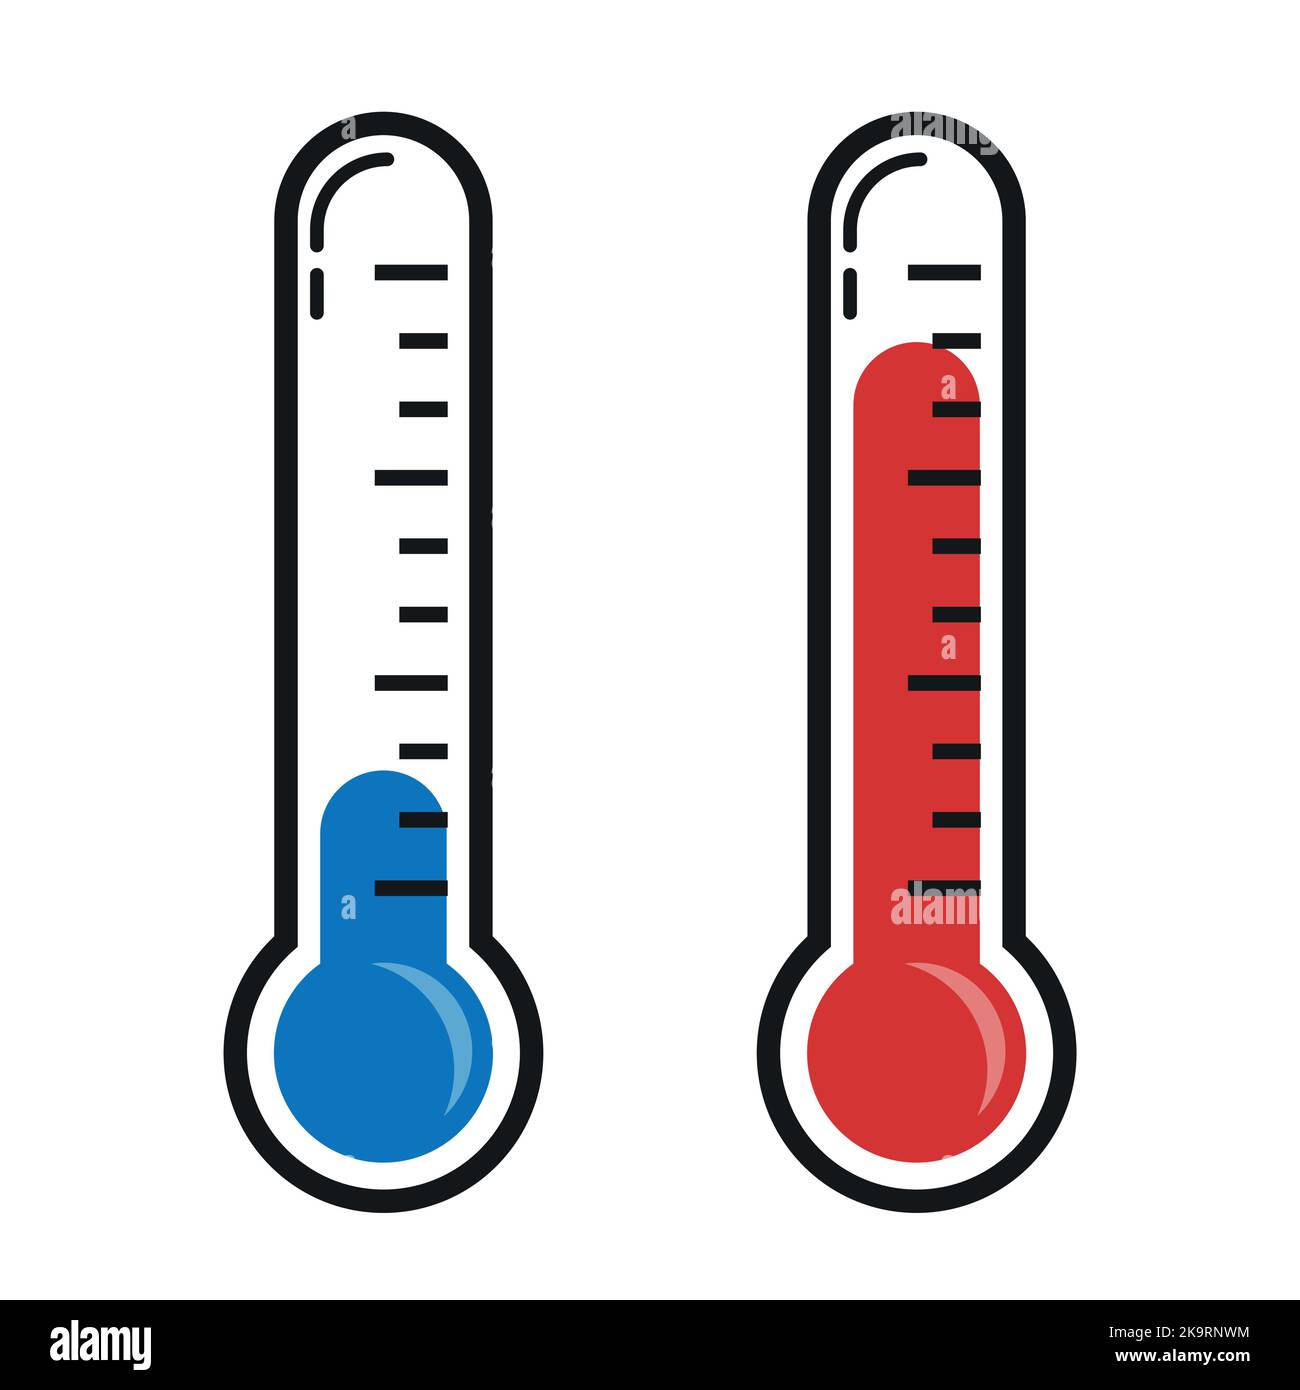 Thermometers Measuring Heat and Cold Temperature. Red and Blue